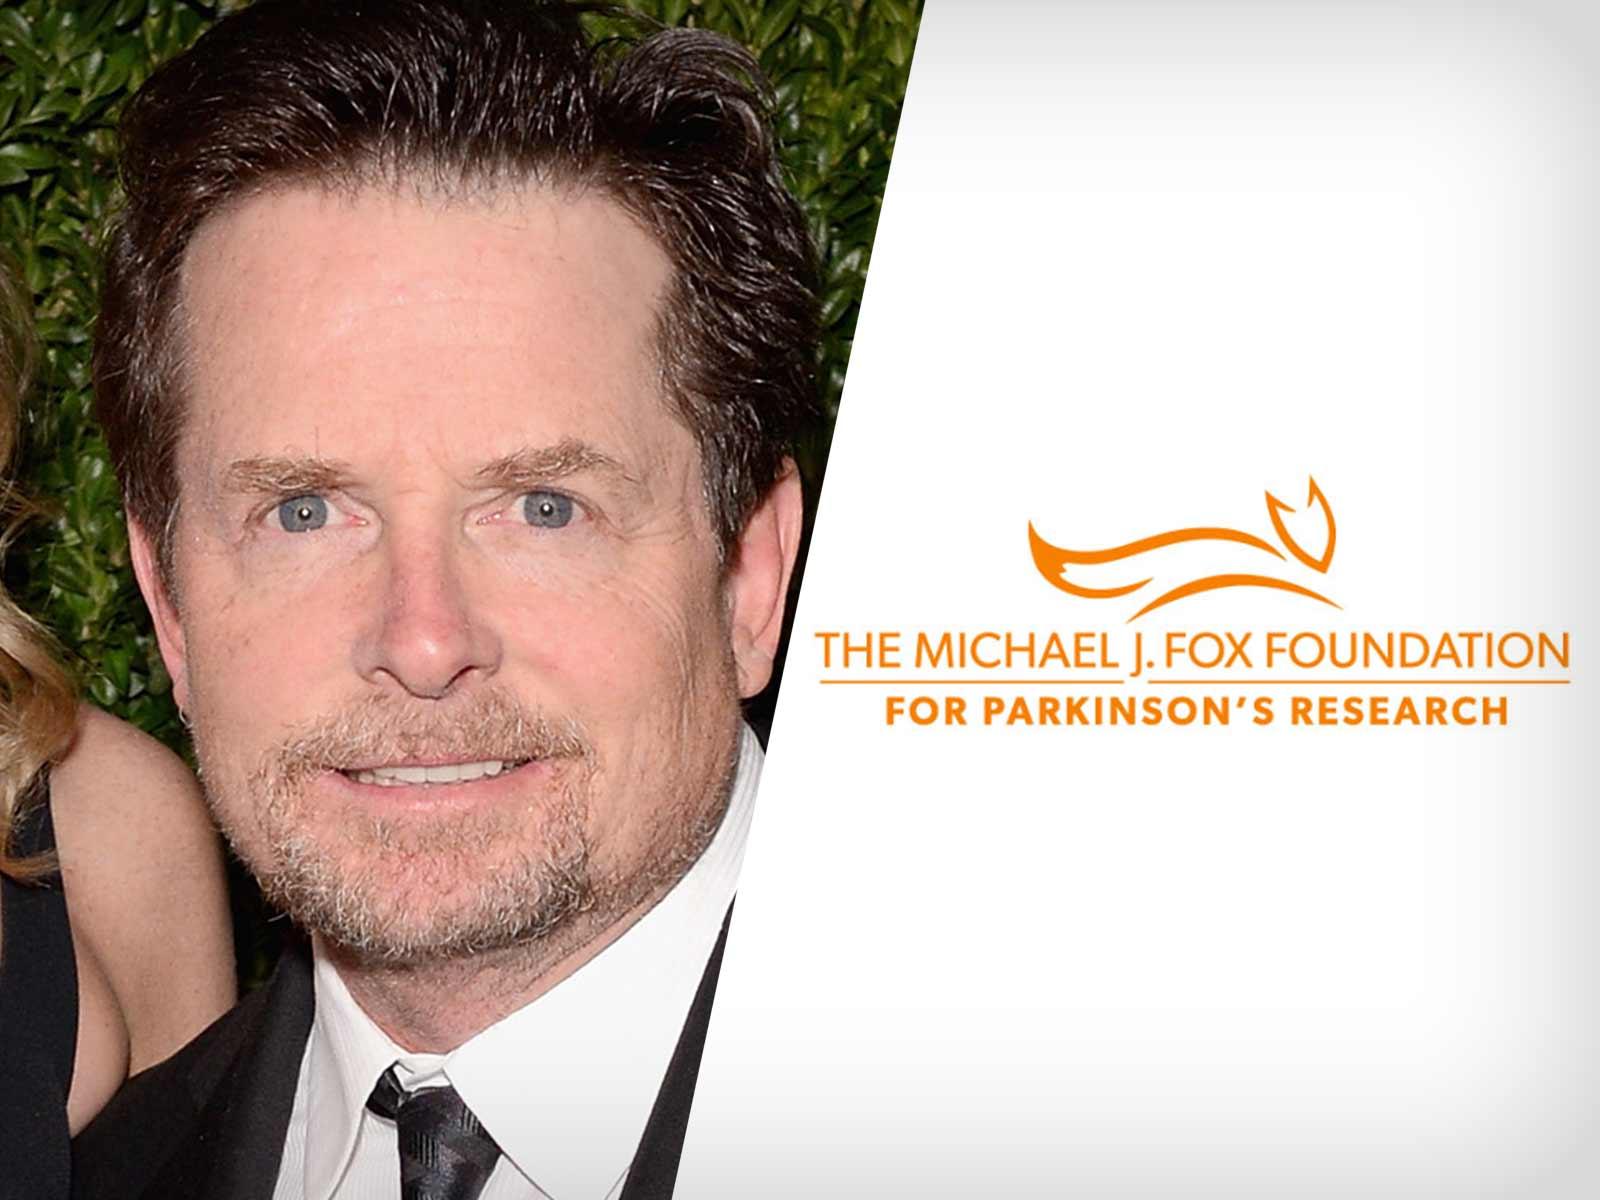 Michael J. Fox Foundation Settles $250k Battle with Family of Man Who Died With Parkinson’s